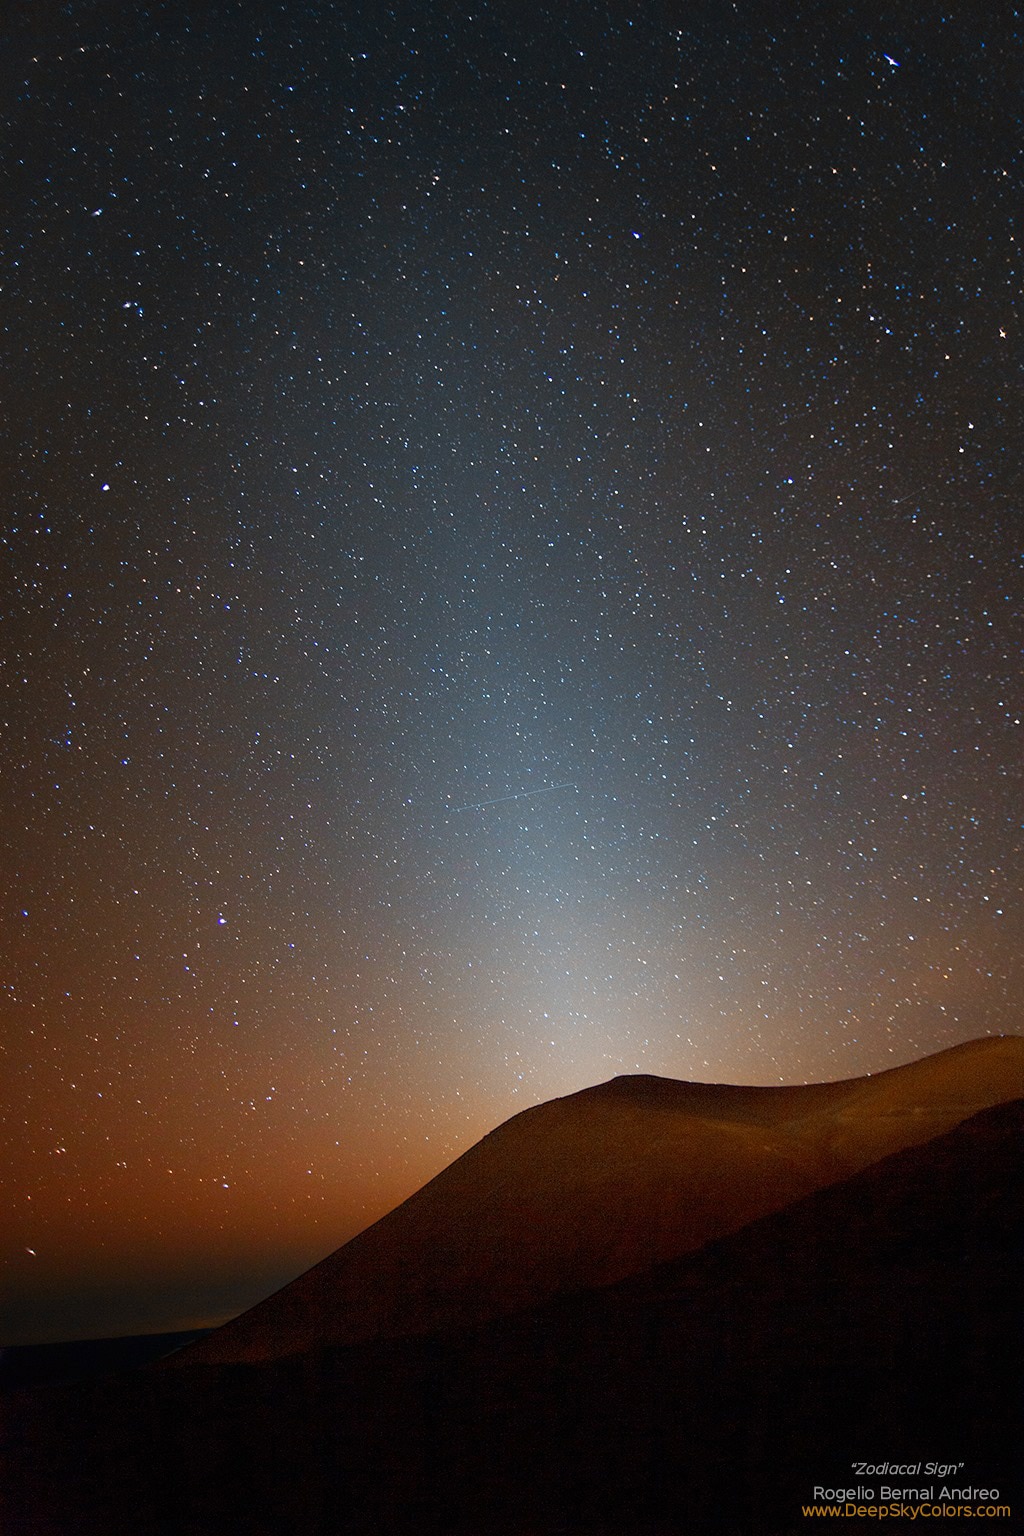 Zodiacal light, sunlight reflected off the scattered remains of thousands of long-dead comets. Credit: Rogelio Bernal Andreo